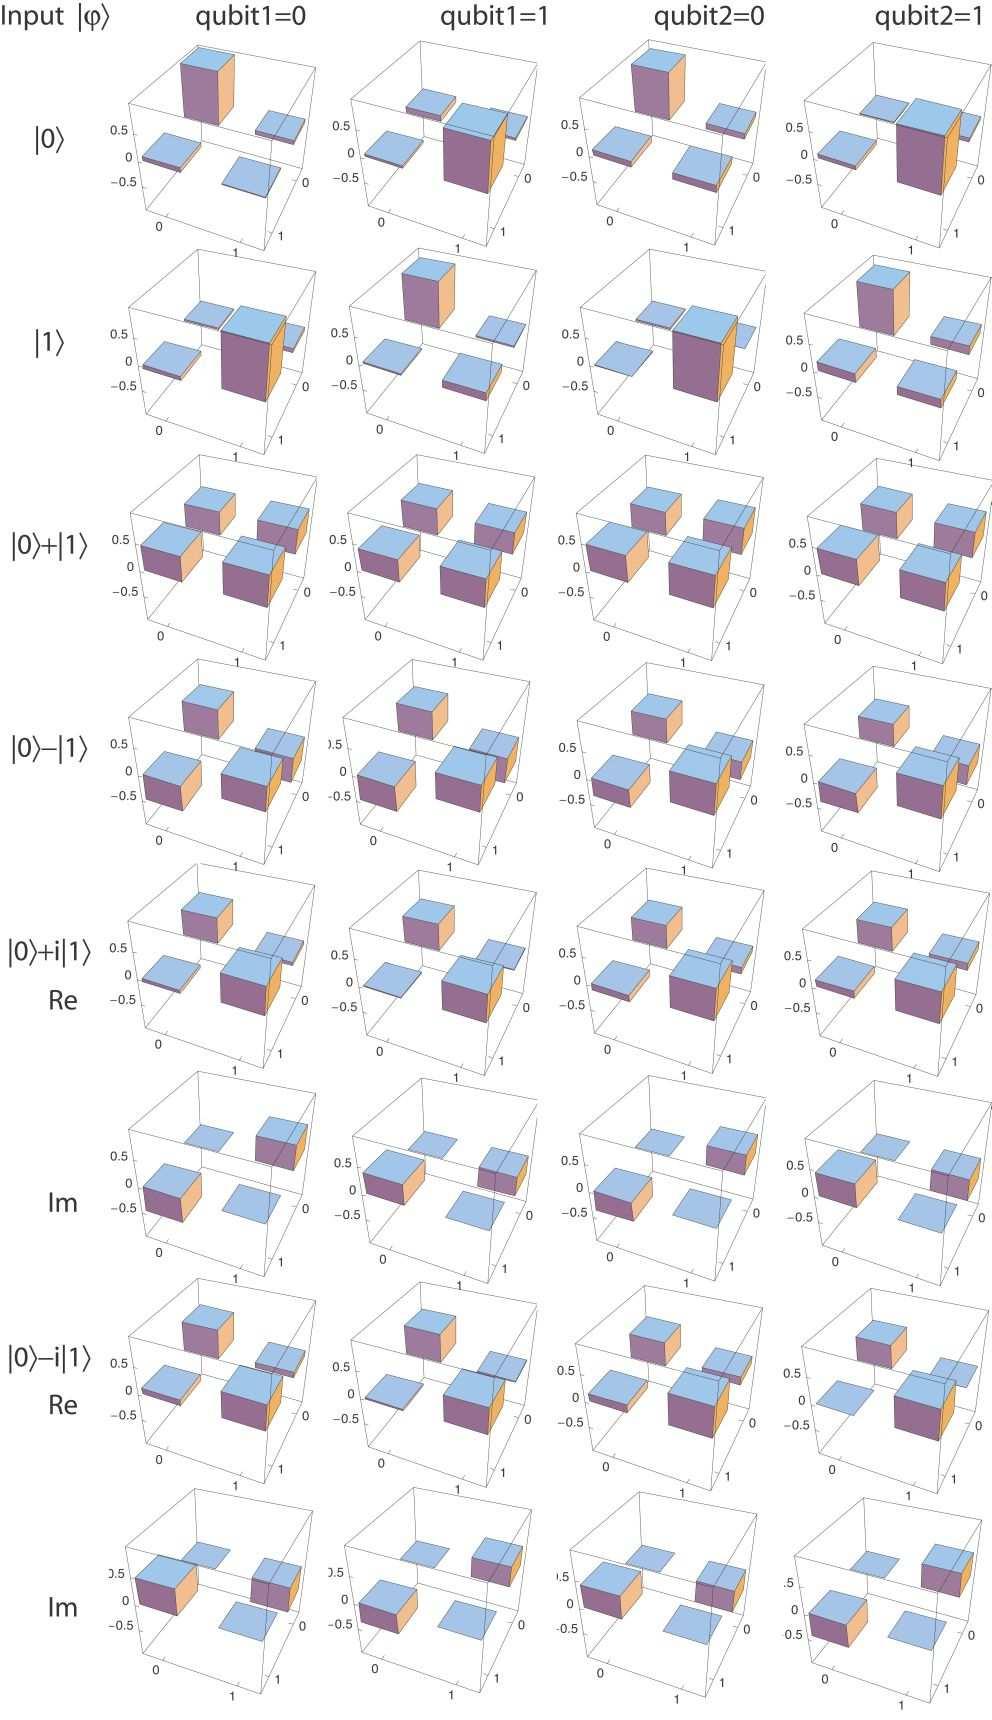 3 FIG. 4: One-qubit decoded state fidelities for the 1-qubit input states cos(θ) 0 + sin(θ) 1 and 0 + e i(90 2φ) 1. FIG. 3: One-qubit decoded states.